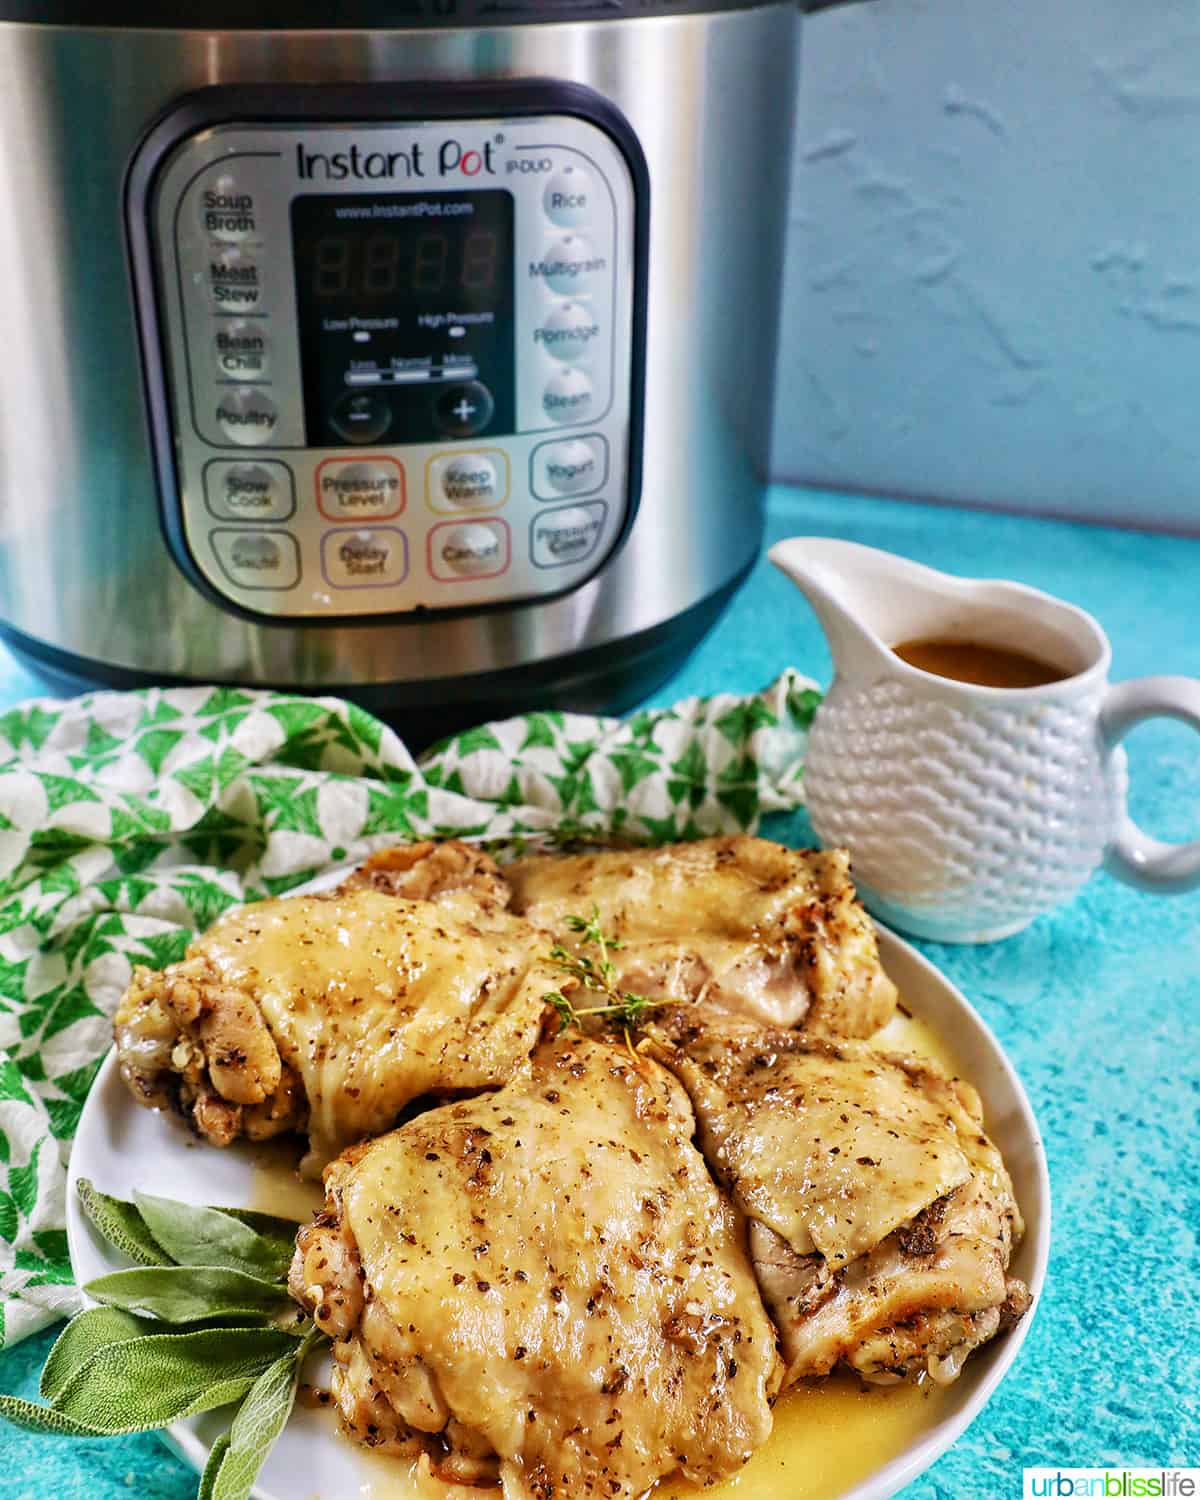 Instant pot electric pressure cooker behind a plate full of cooked chicken thighs and a pitcher of gravy on a blue background.